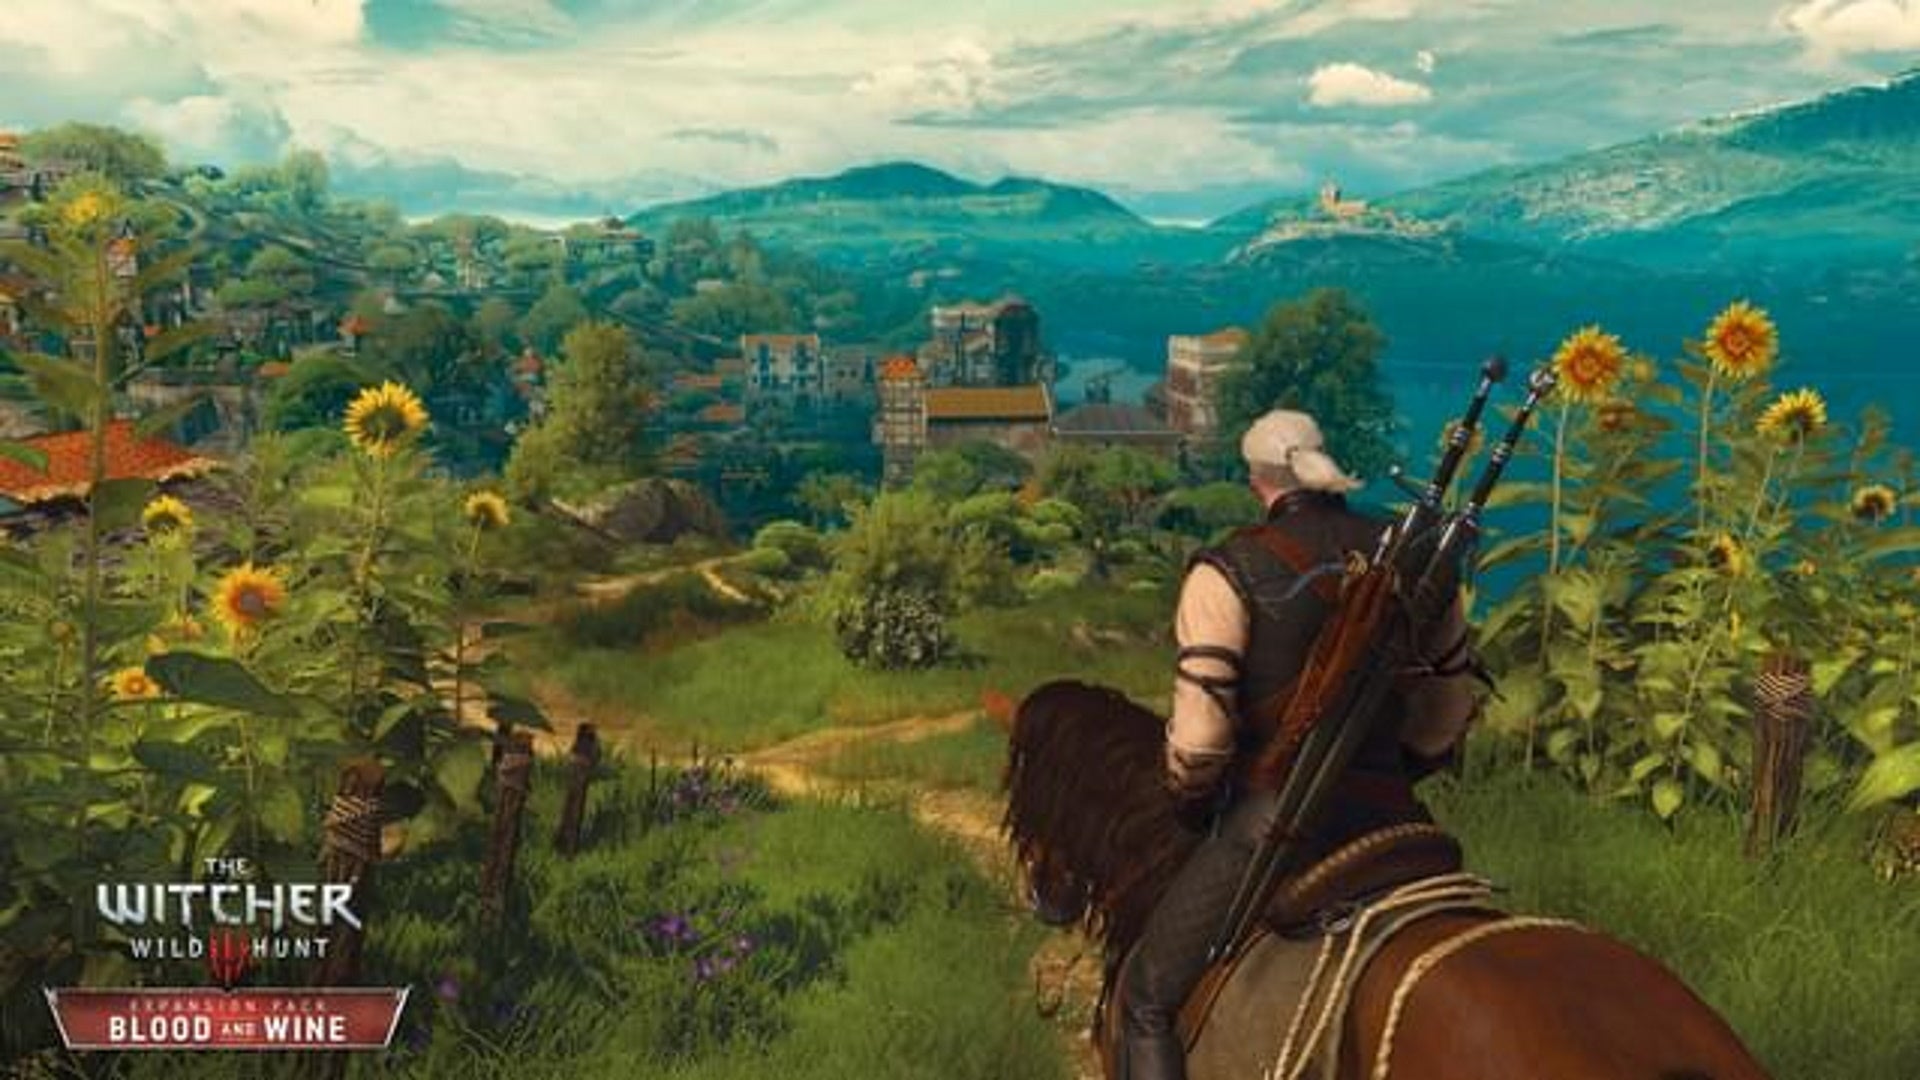 The Witcher 3 Grandmaster Feline gear locations: A man with white hair done up in a ponytail is sitting on a brown horse. They are on a hill overlooking a field of sunflowers, with a mountain range rising in the distance